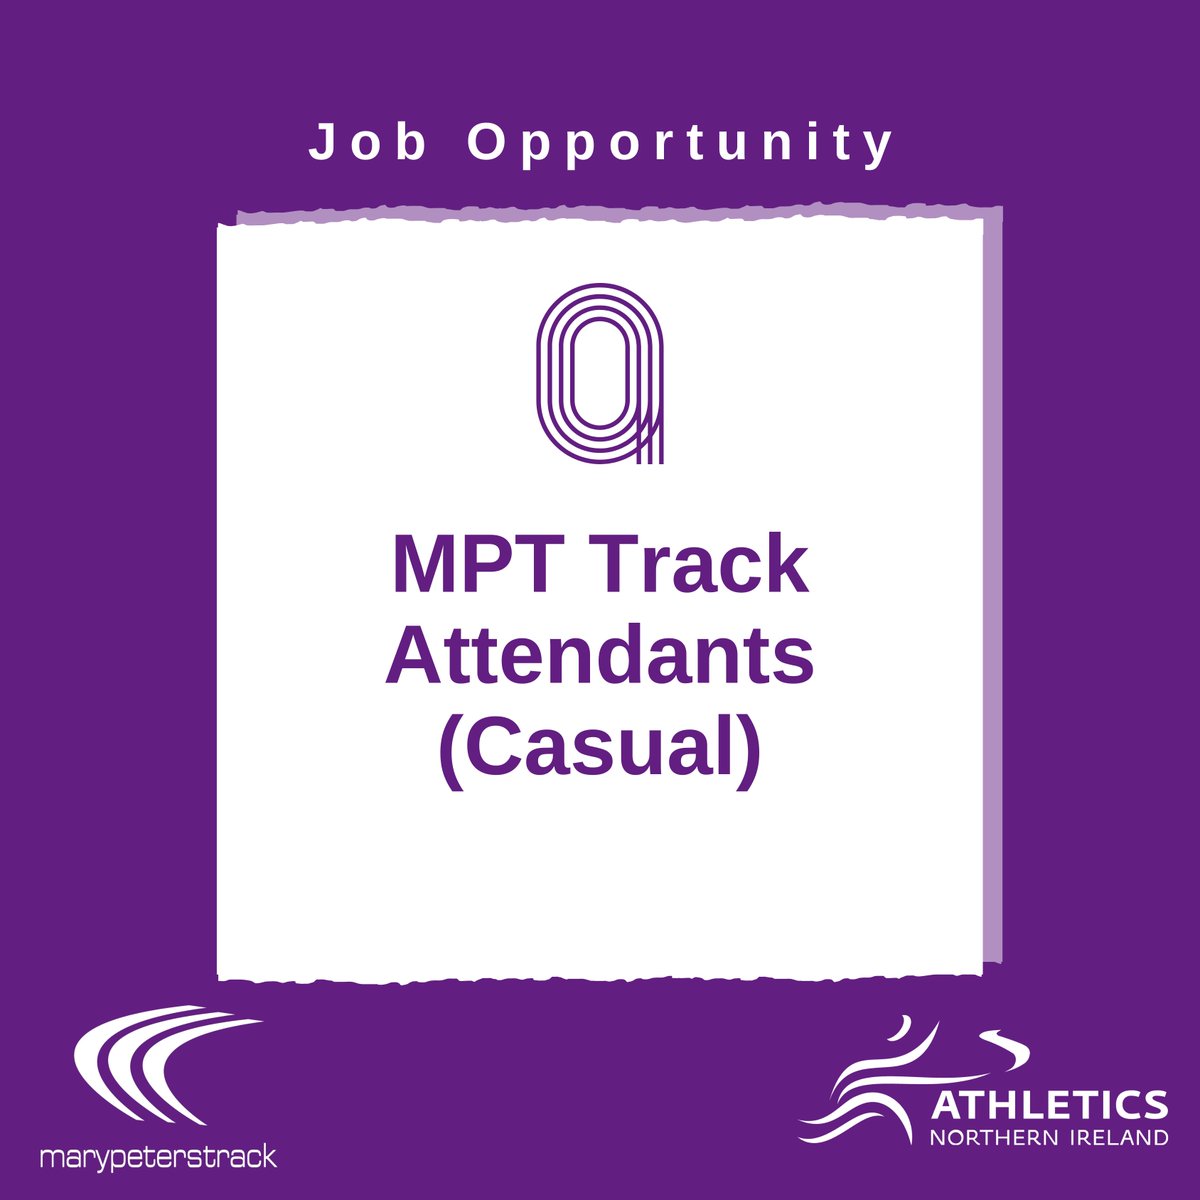 ❗ New Job Roles Join the Athletics NI and Mary Peters Track team! We're hiring: 👉 Events, Membership & Communications Manager 👉 MPT Facility Manager 👉 Casual MPT Track Attendants Apply now! 👇 athleticsni.org/About/Job-Oppo… #AthleticsNI #NewJobs